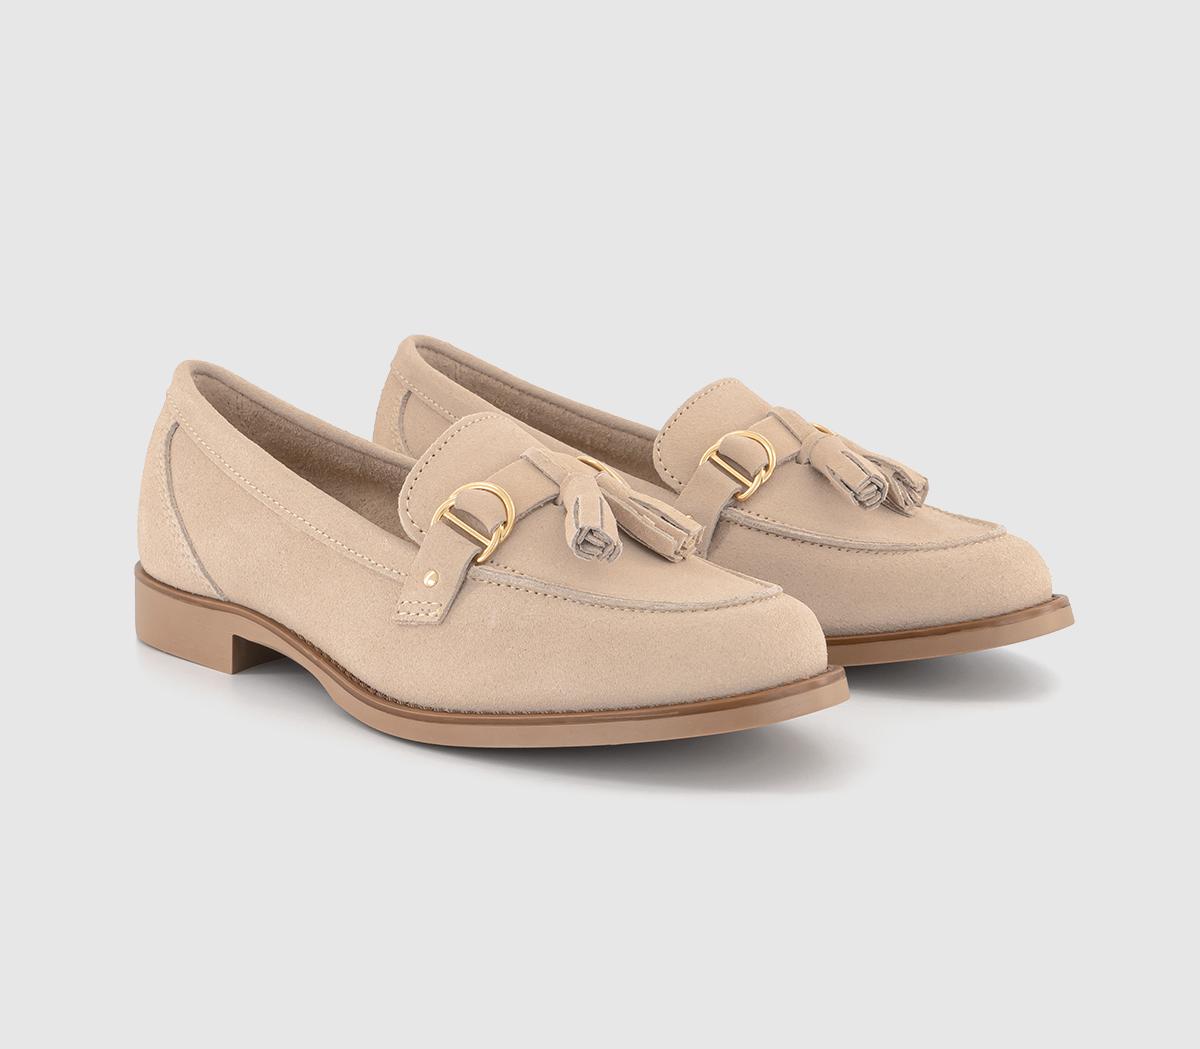 OFFICE Womens Feels Leather Trim Tassel Loafers Blush Suede Natural, 9